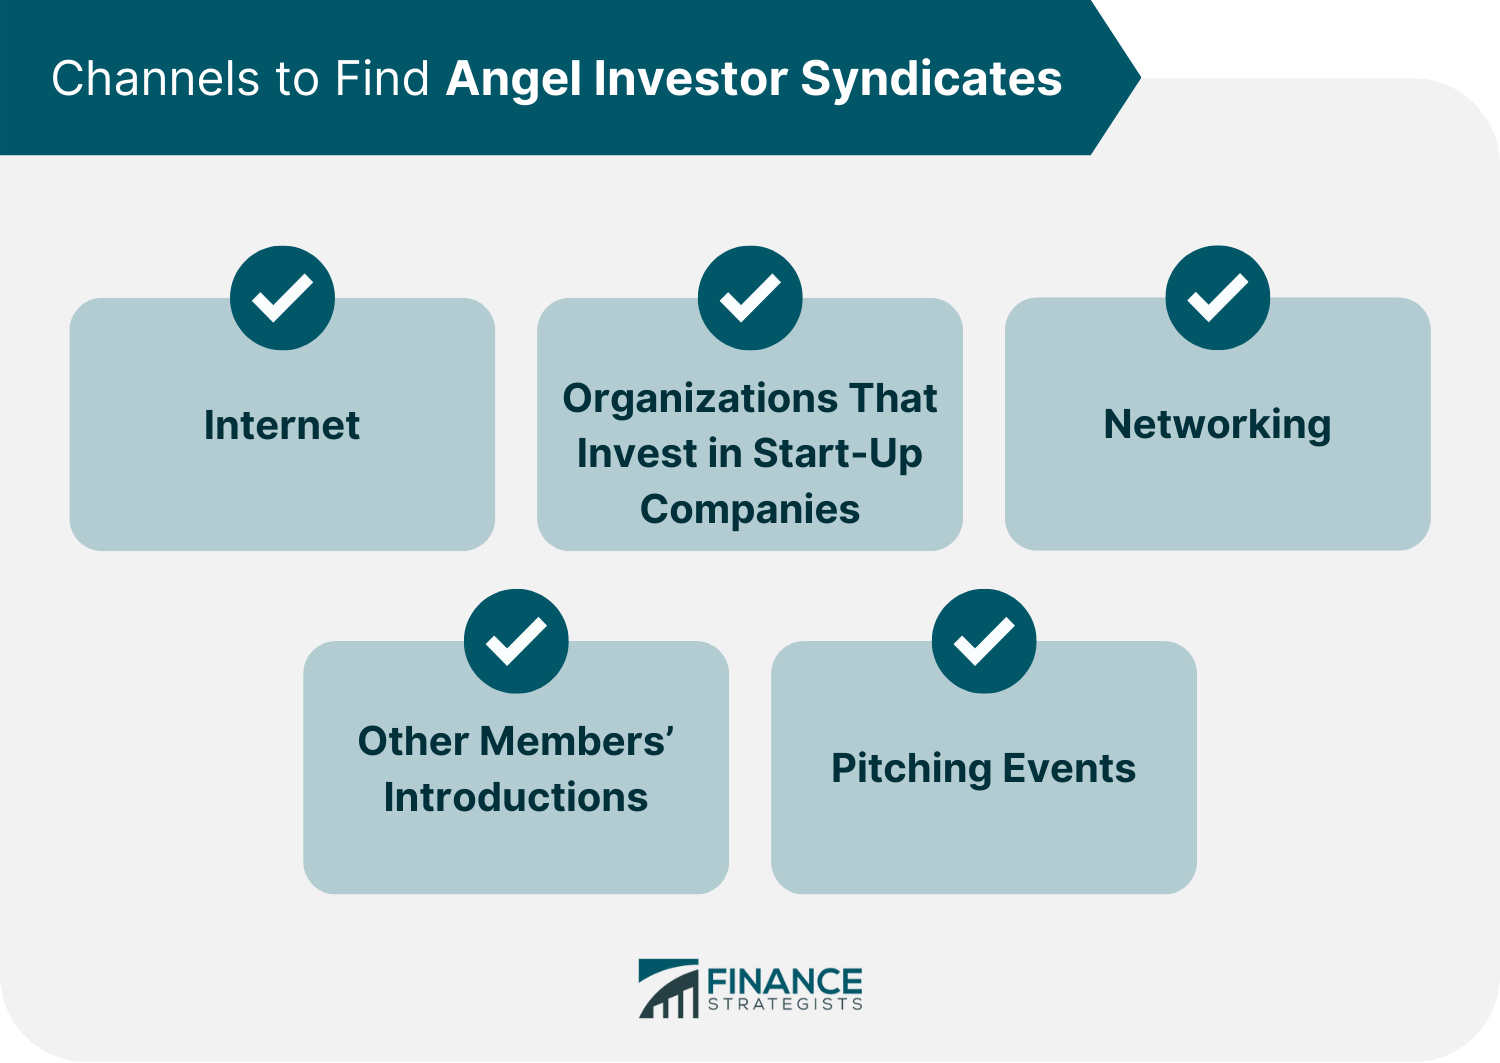 Channels to Find Angel Investor Syndicates